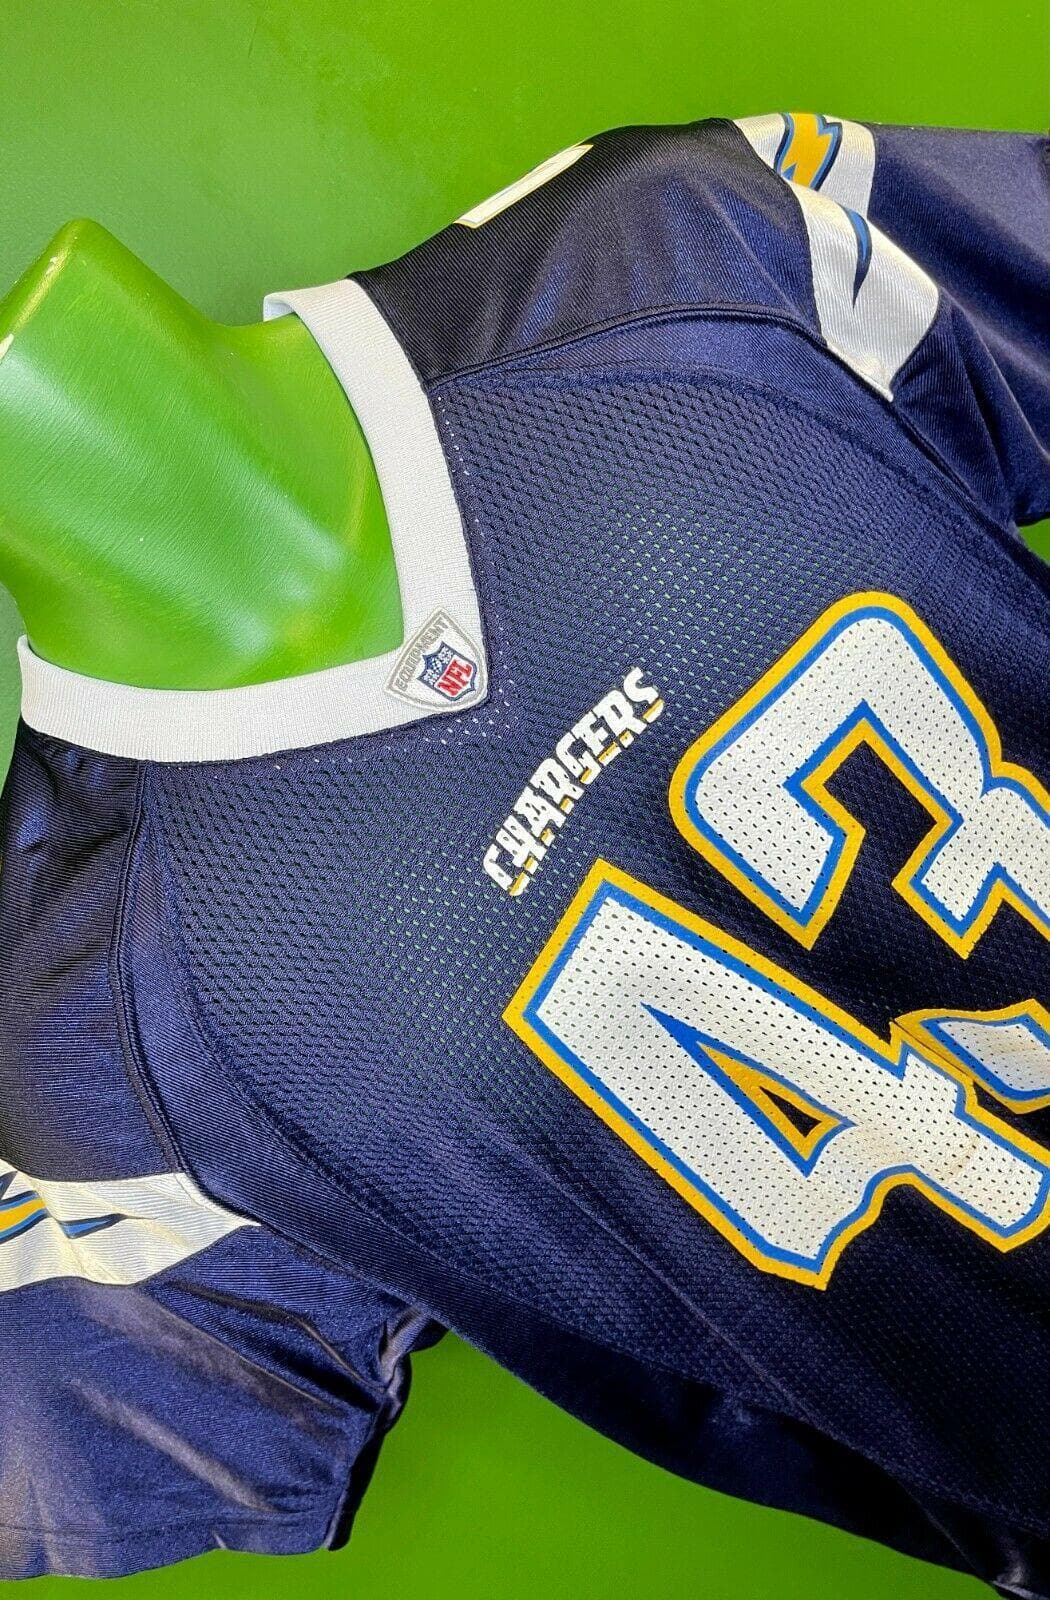  Chargers Jersey